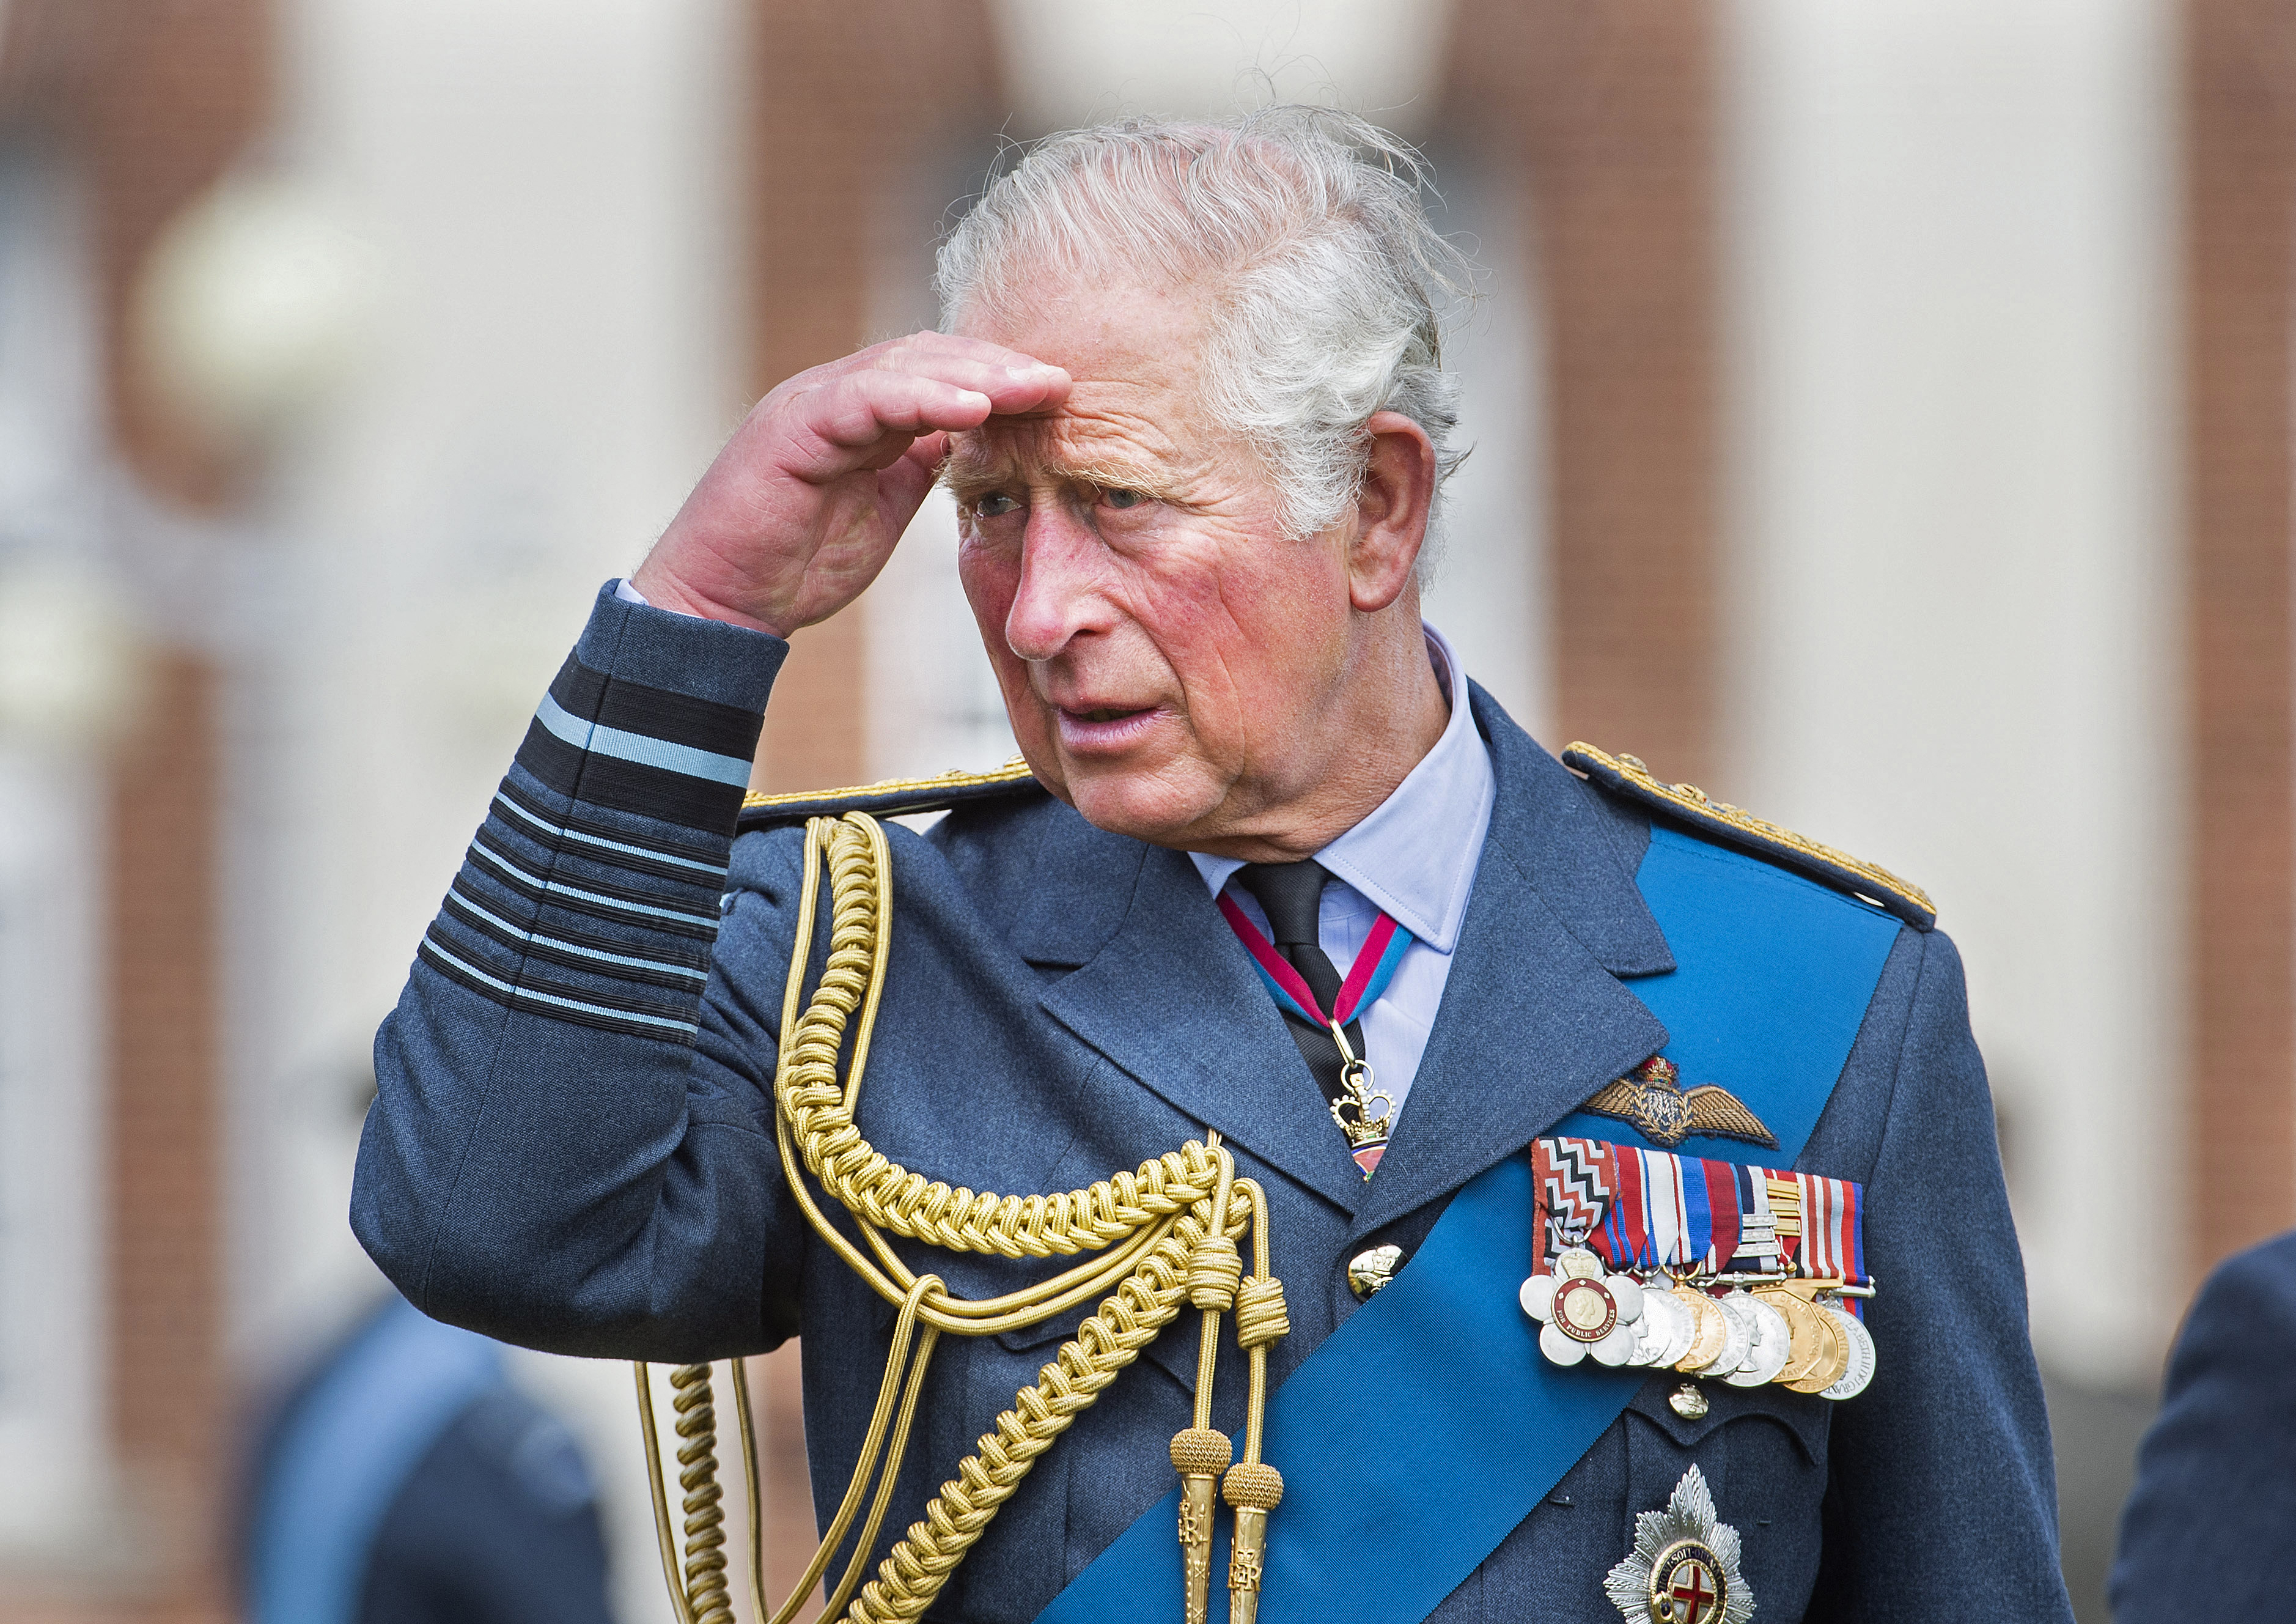 Where did the royal family go to uni?